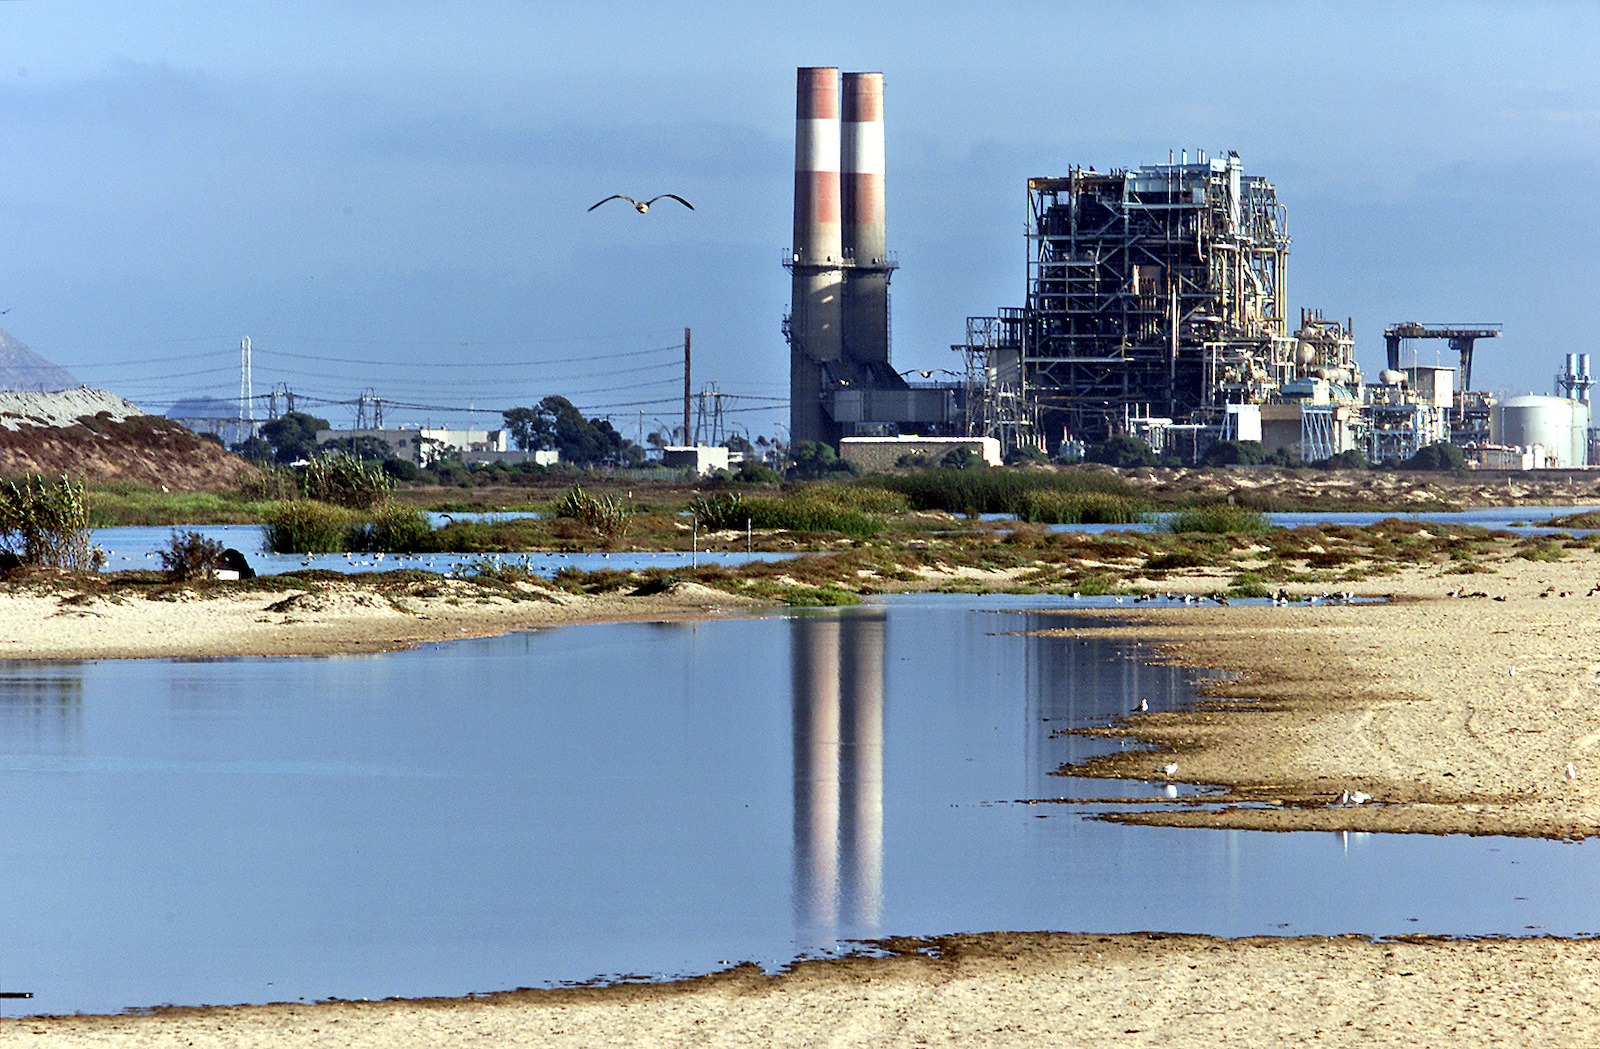 The Reliant power plant on the wetlands of Ormond Beach is one of more than 400 toxic facilities in California at risk for severe flooding events before 2100.